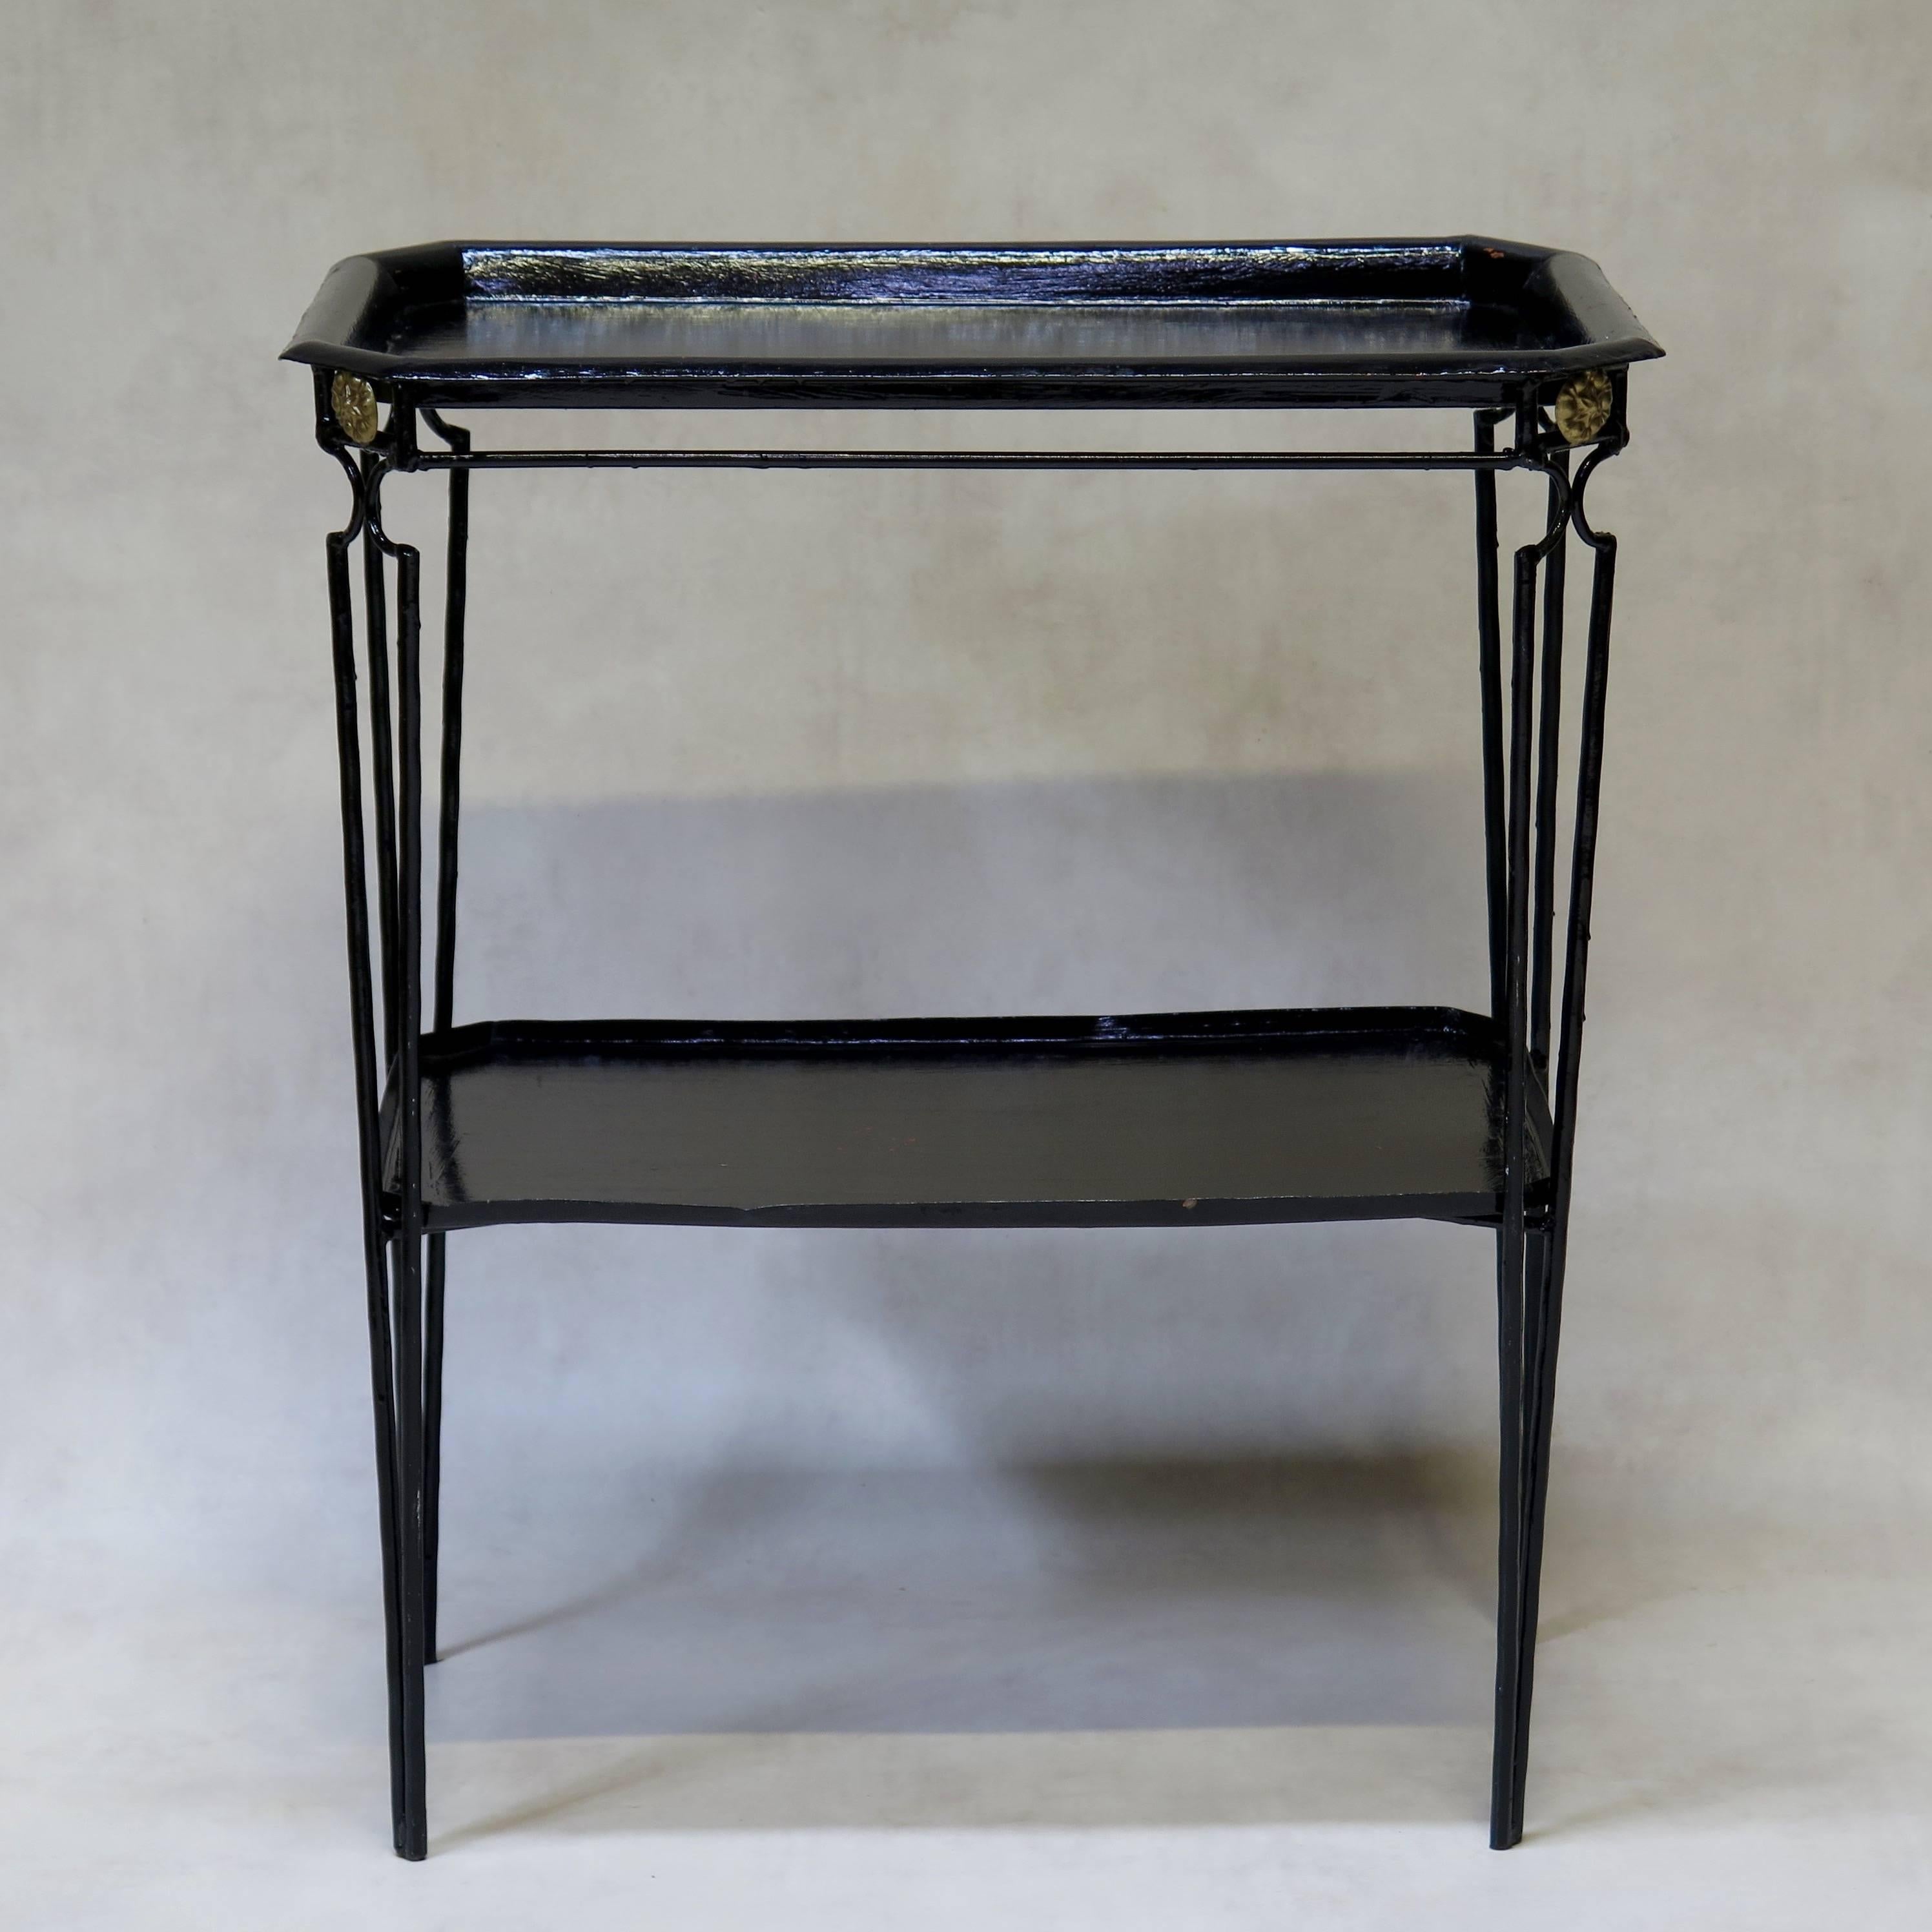 Neoclassical Four Black Painted Metal Tray Tables in the 1940s Style, France, circa 1960s For Sale